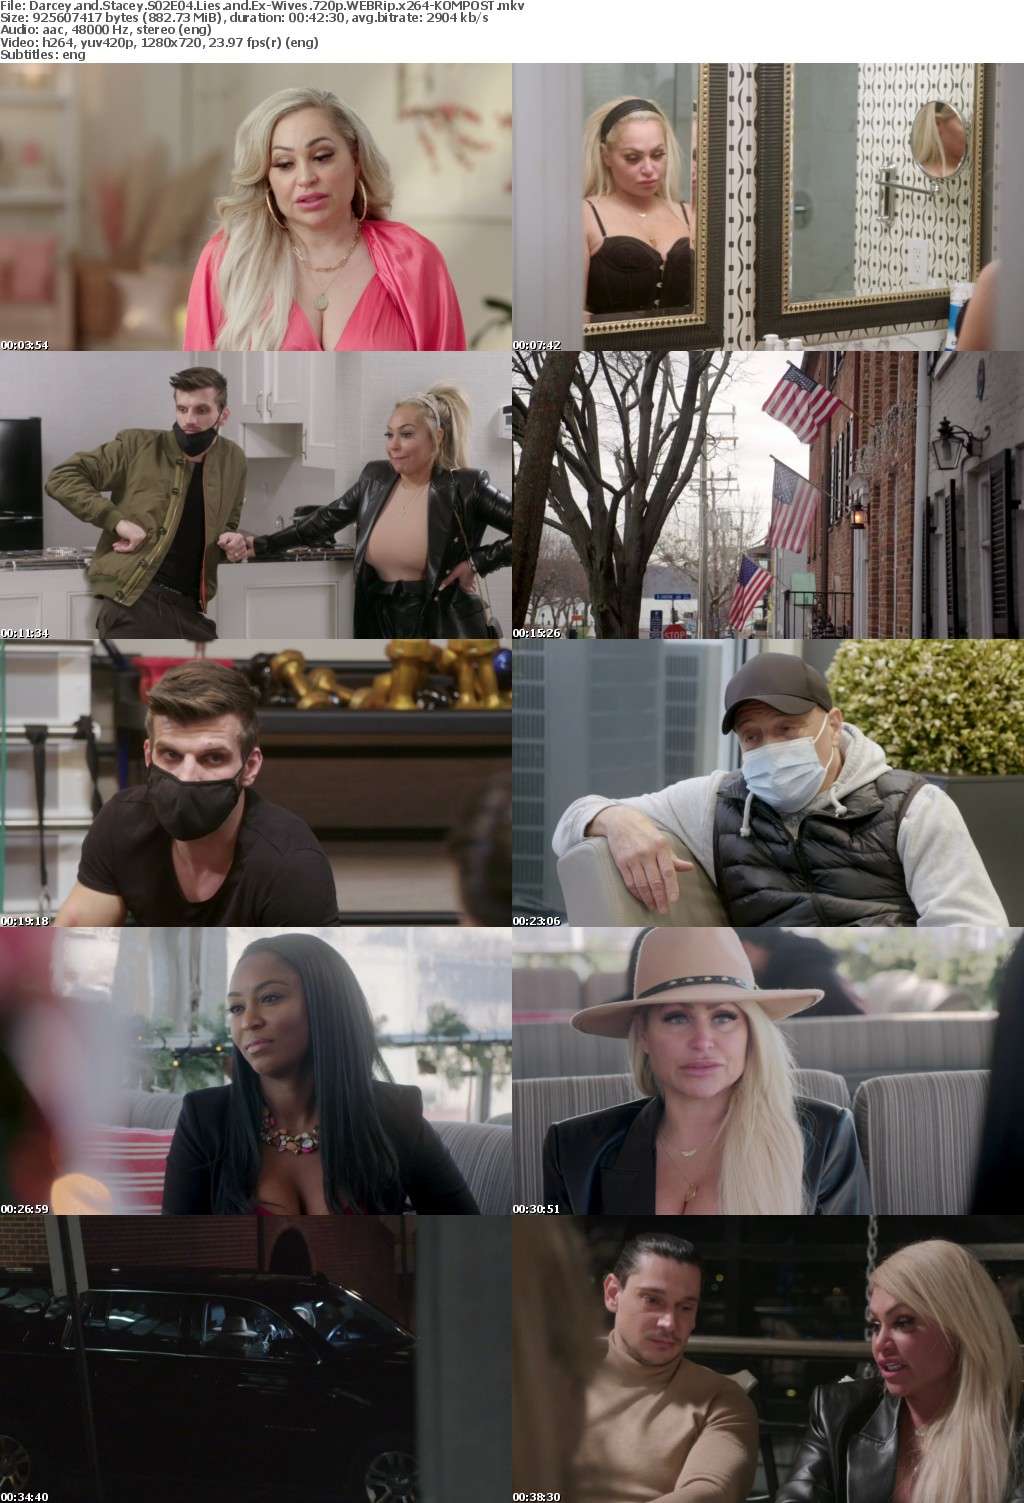 Darcey and Stacey S02E04 Lies and Ex-Wives 720p WEBRip x264-KOMPOST